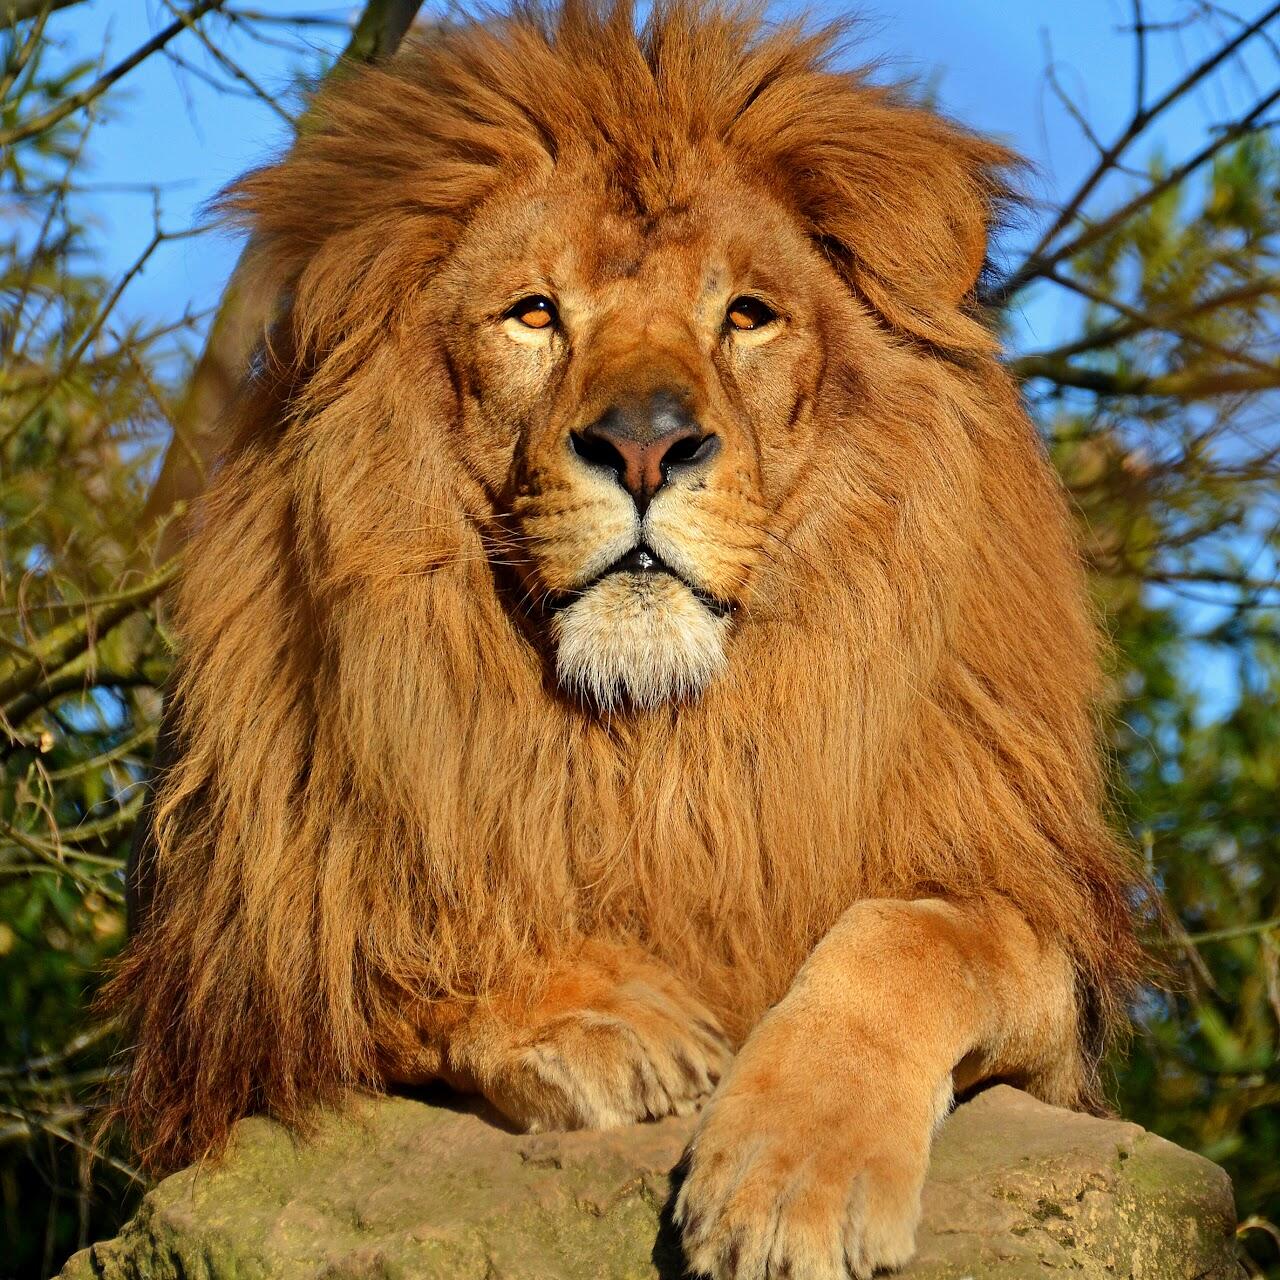 Lion's Famous looking style at Smithsonian Zoo